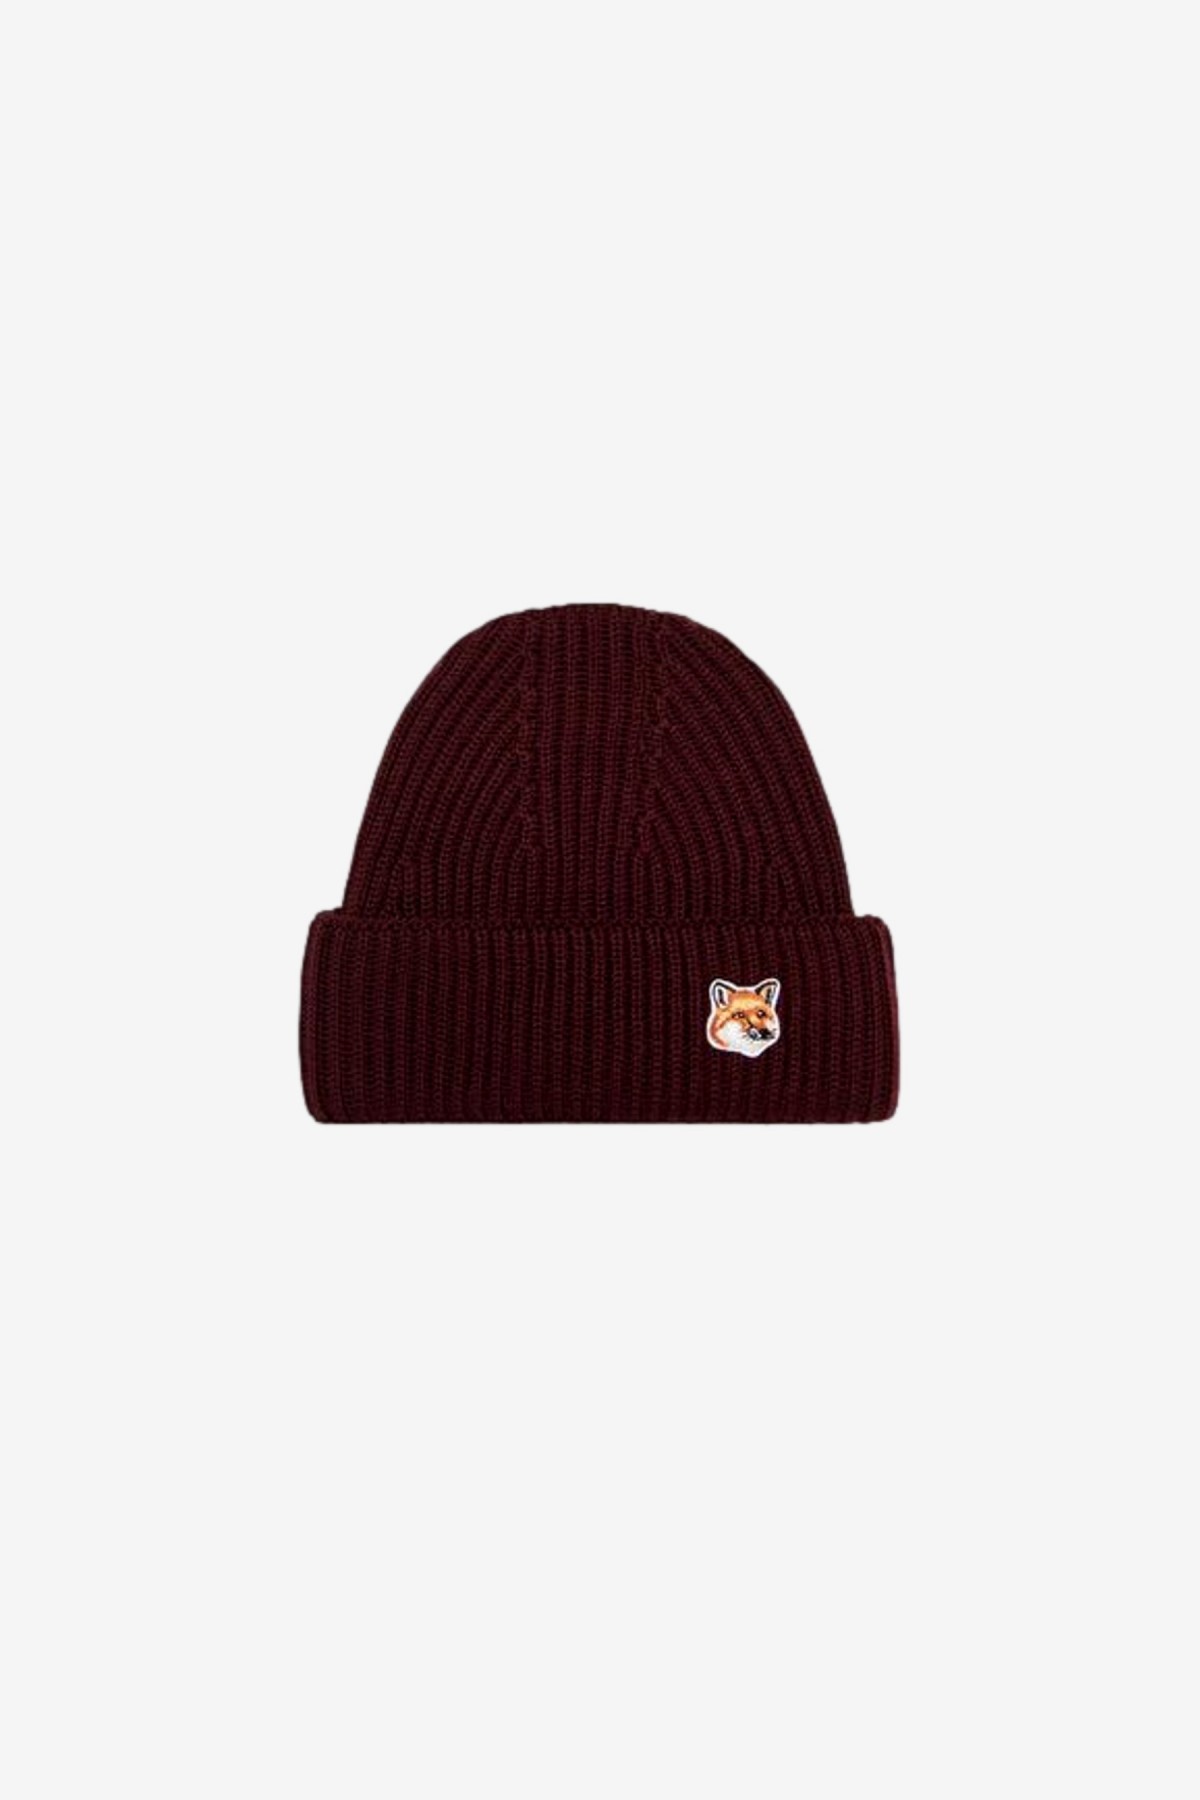 Maison Kitsuné Fox Head Patch Ribbed Hat in Wine Lees